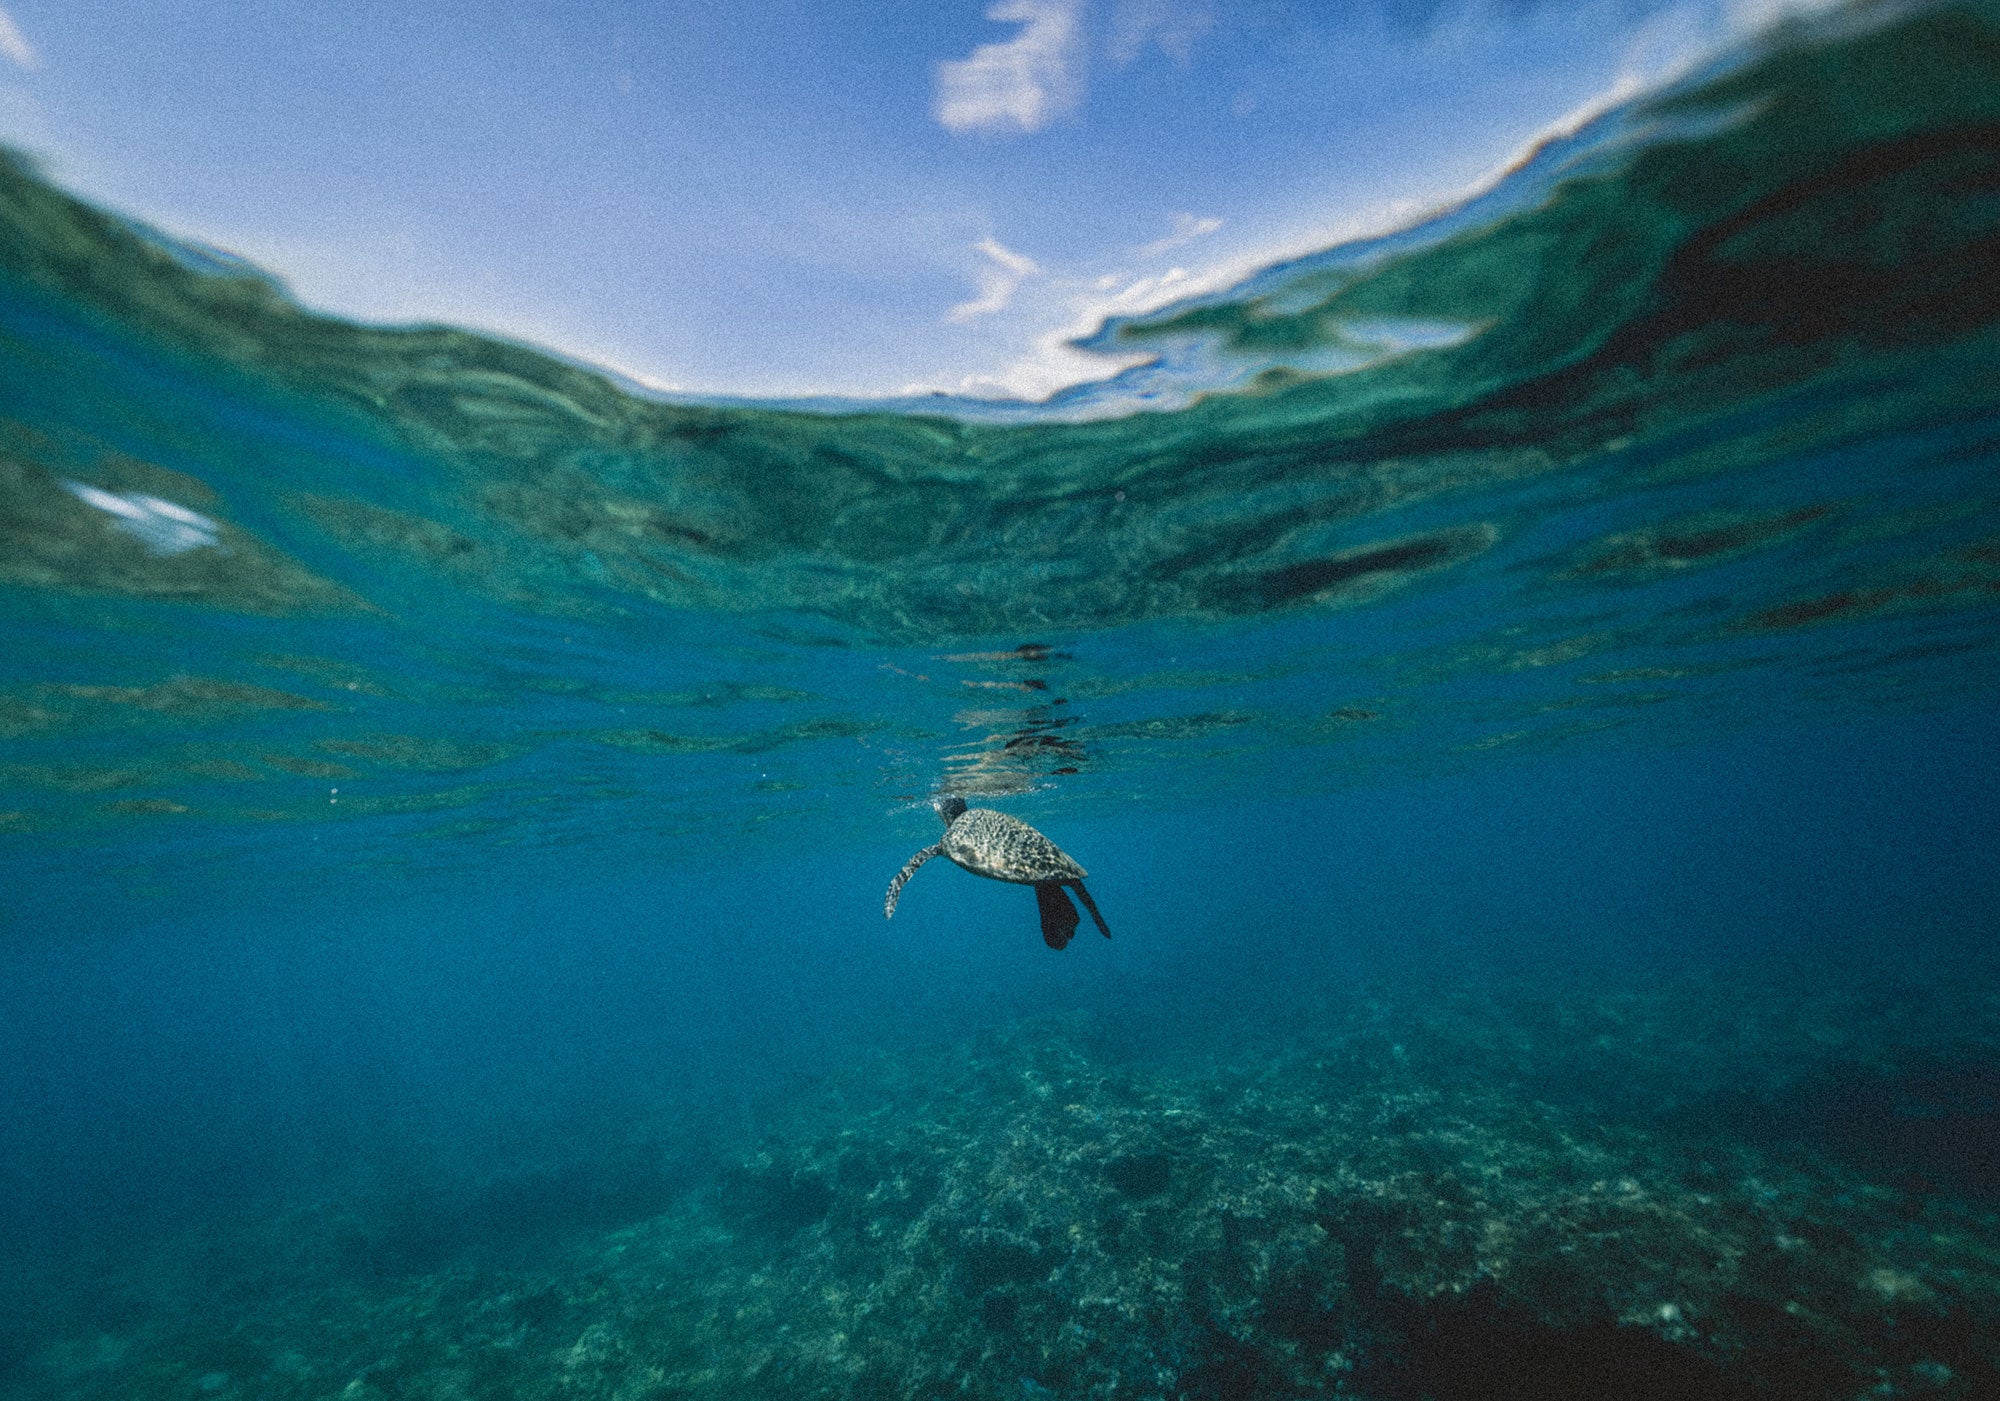 A sea turtle swims below the ocean's surface under a light blue sky.